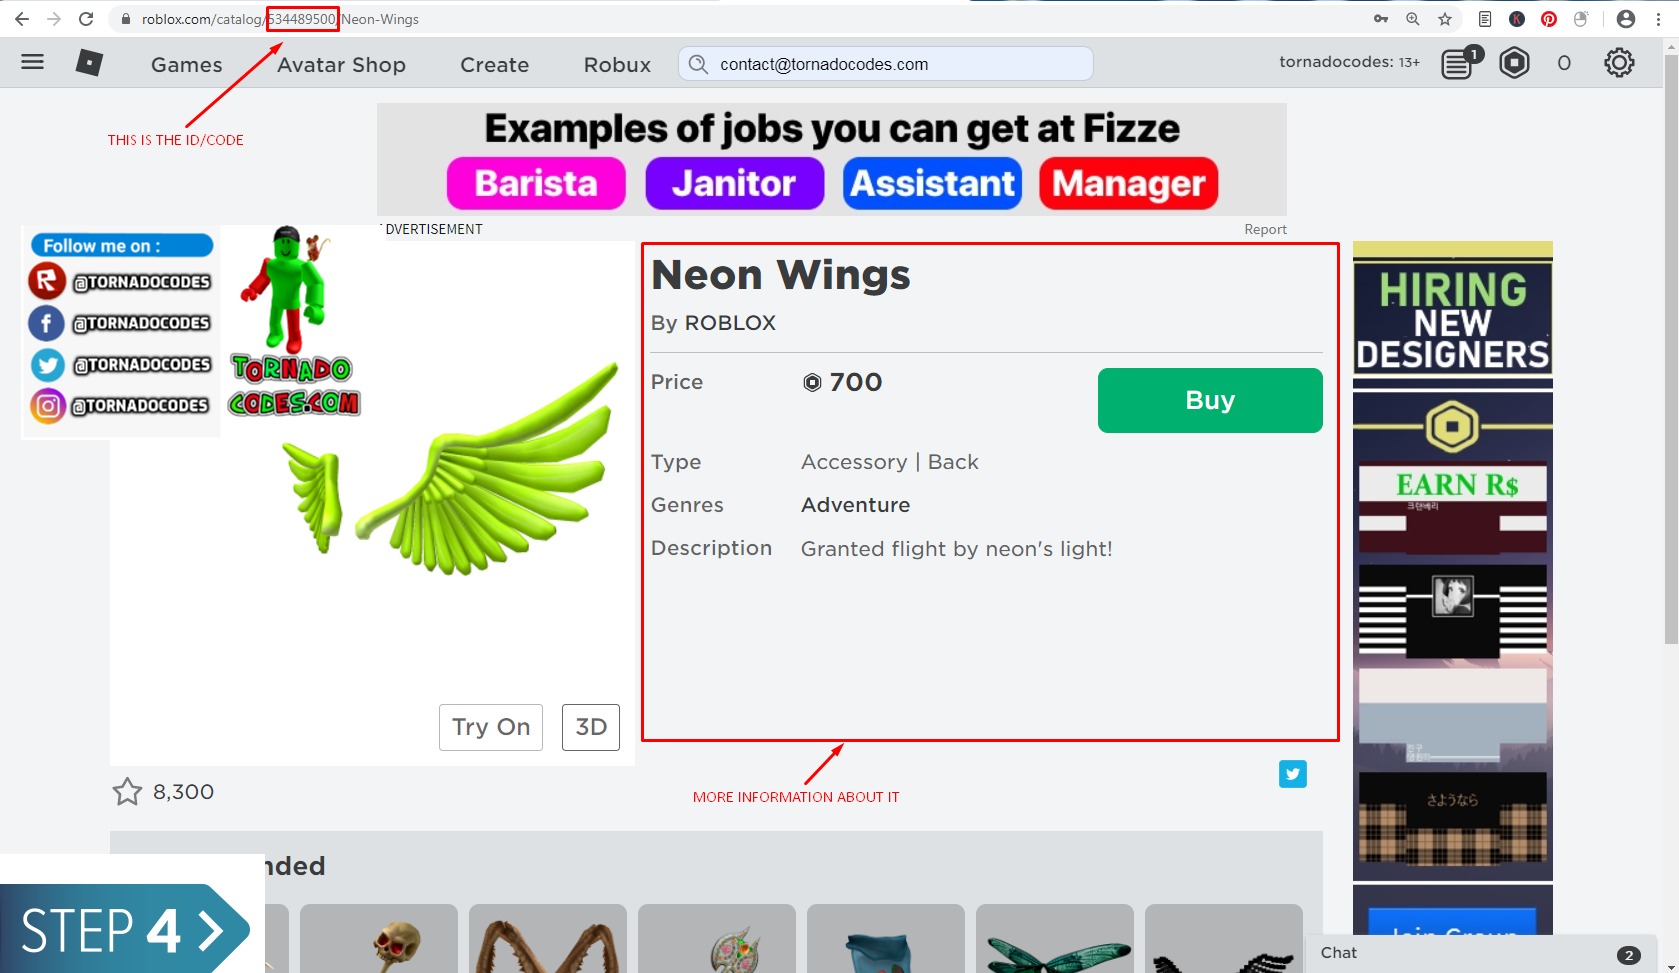 Full list of Roblox face accessories and IDs